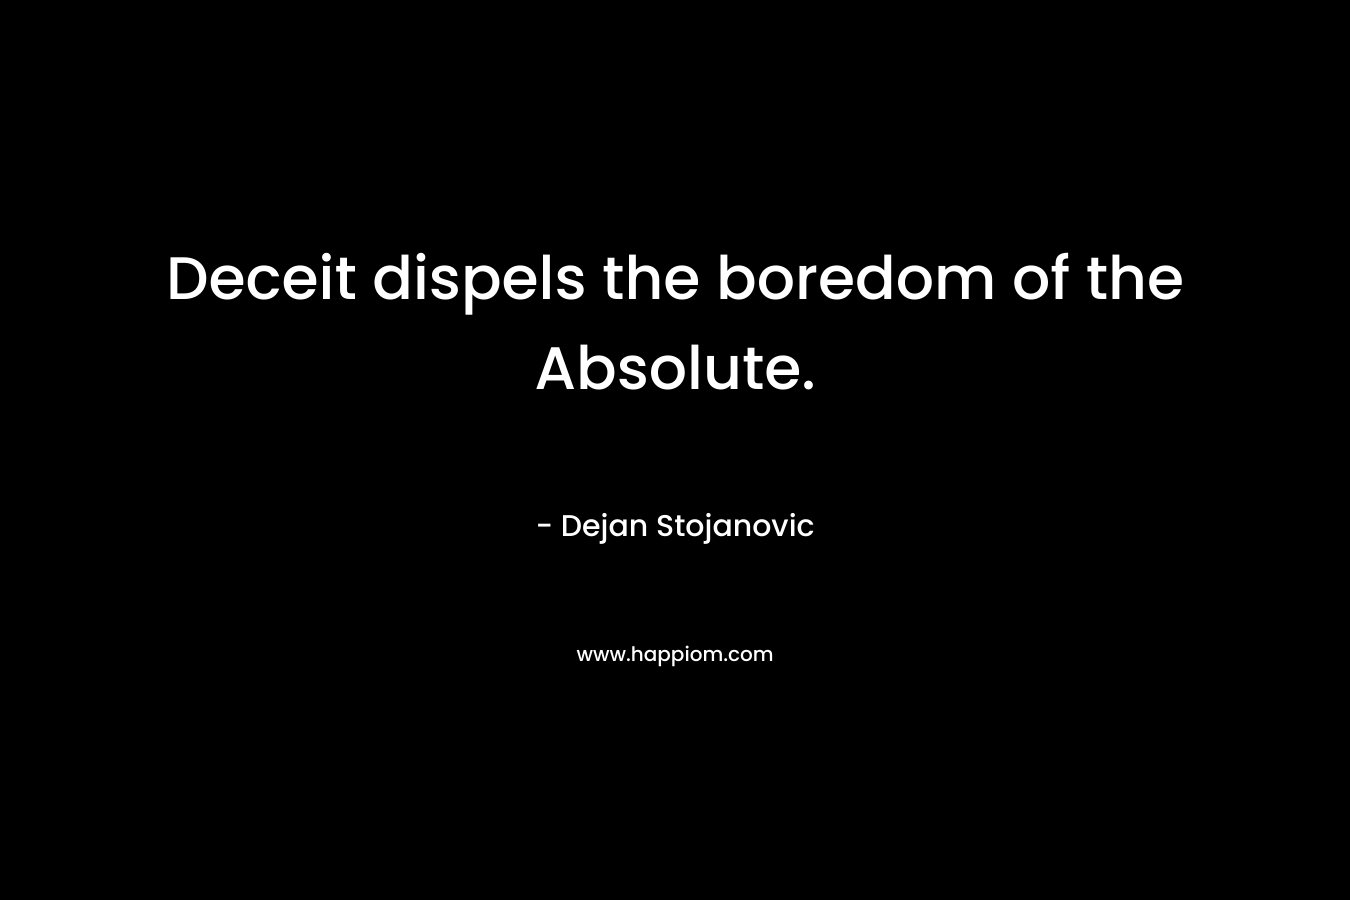 Deceit dispels the boredom of the Absolute.